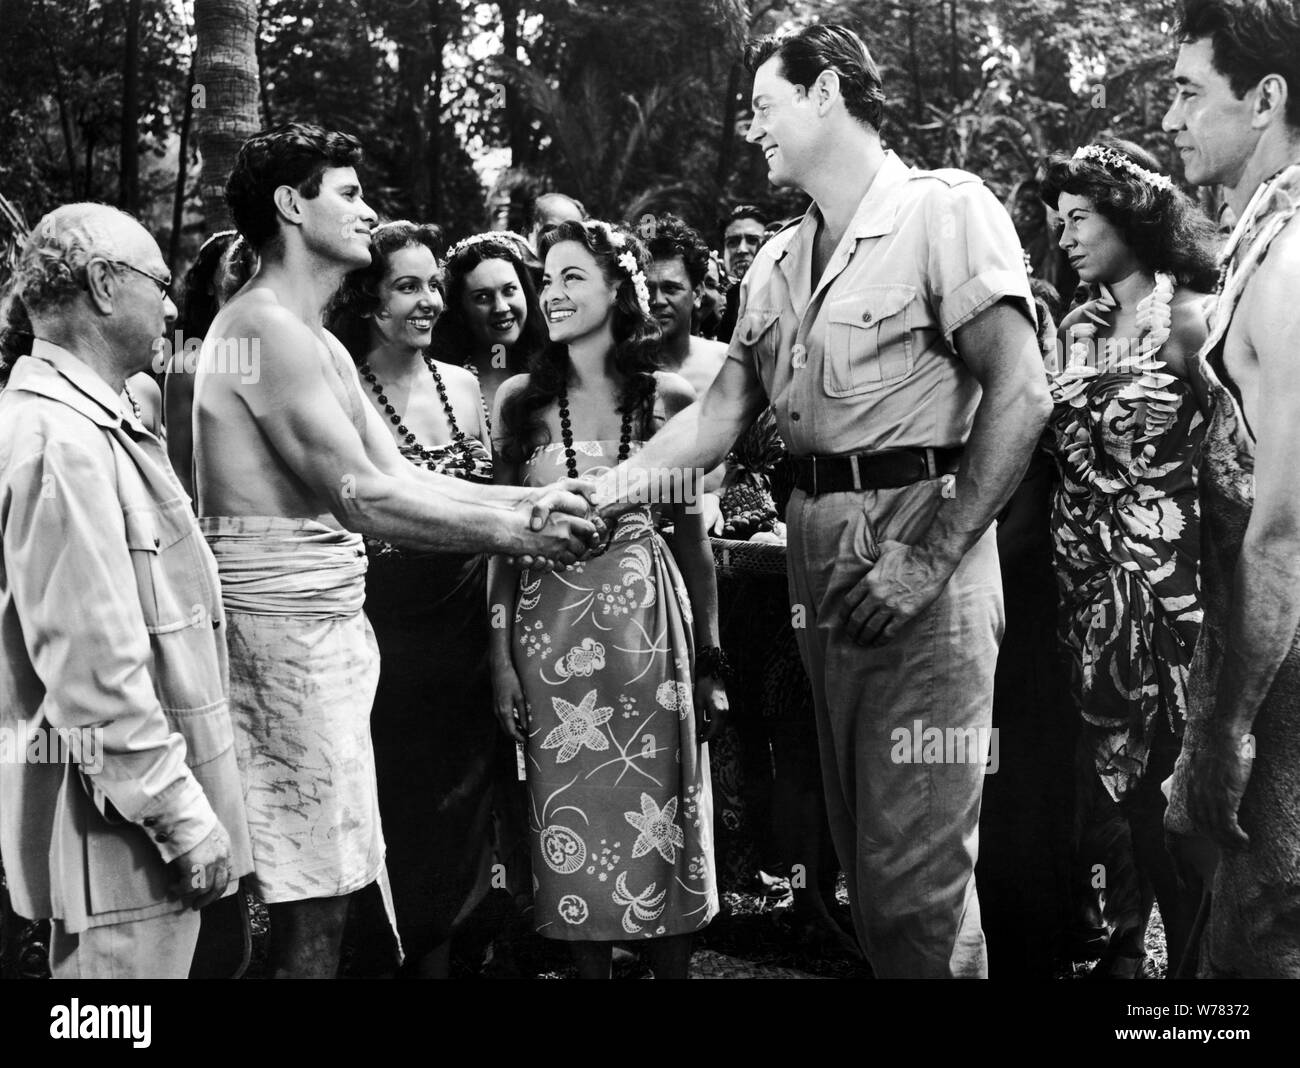 SHERRY MORELAND, JOHNNY WEISSMULLER, FURY OF THE CONGO, 1951 Stock Photo